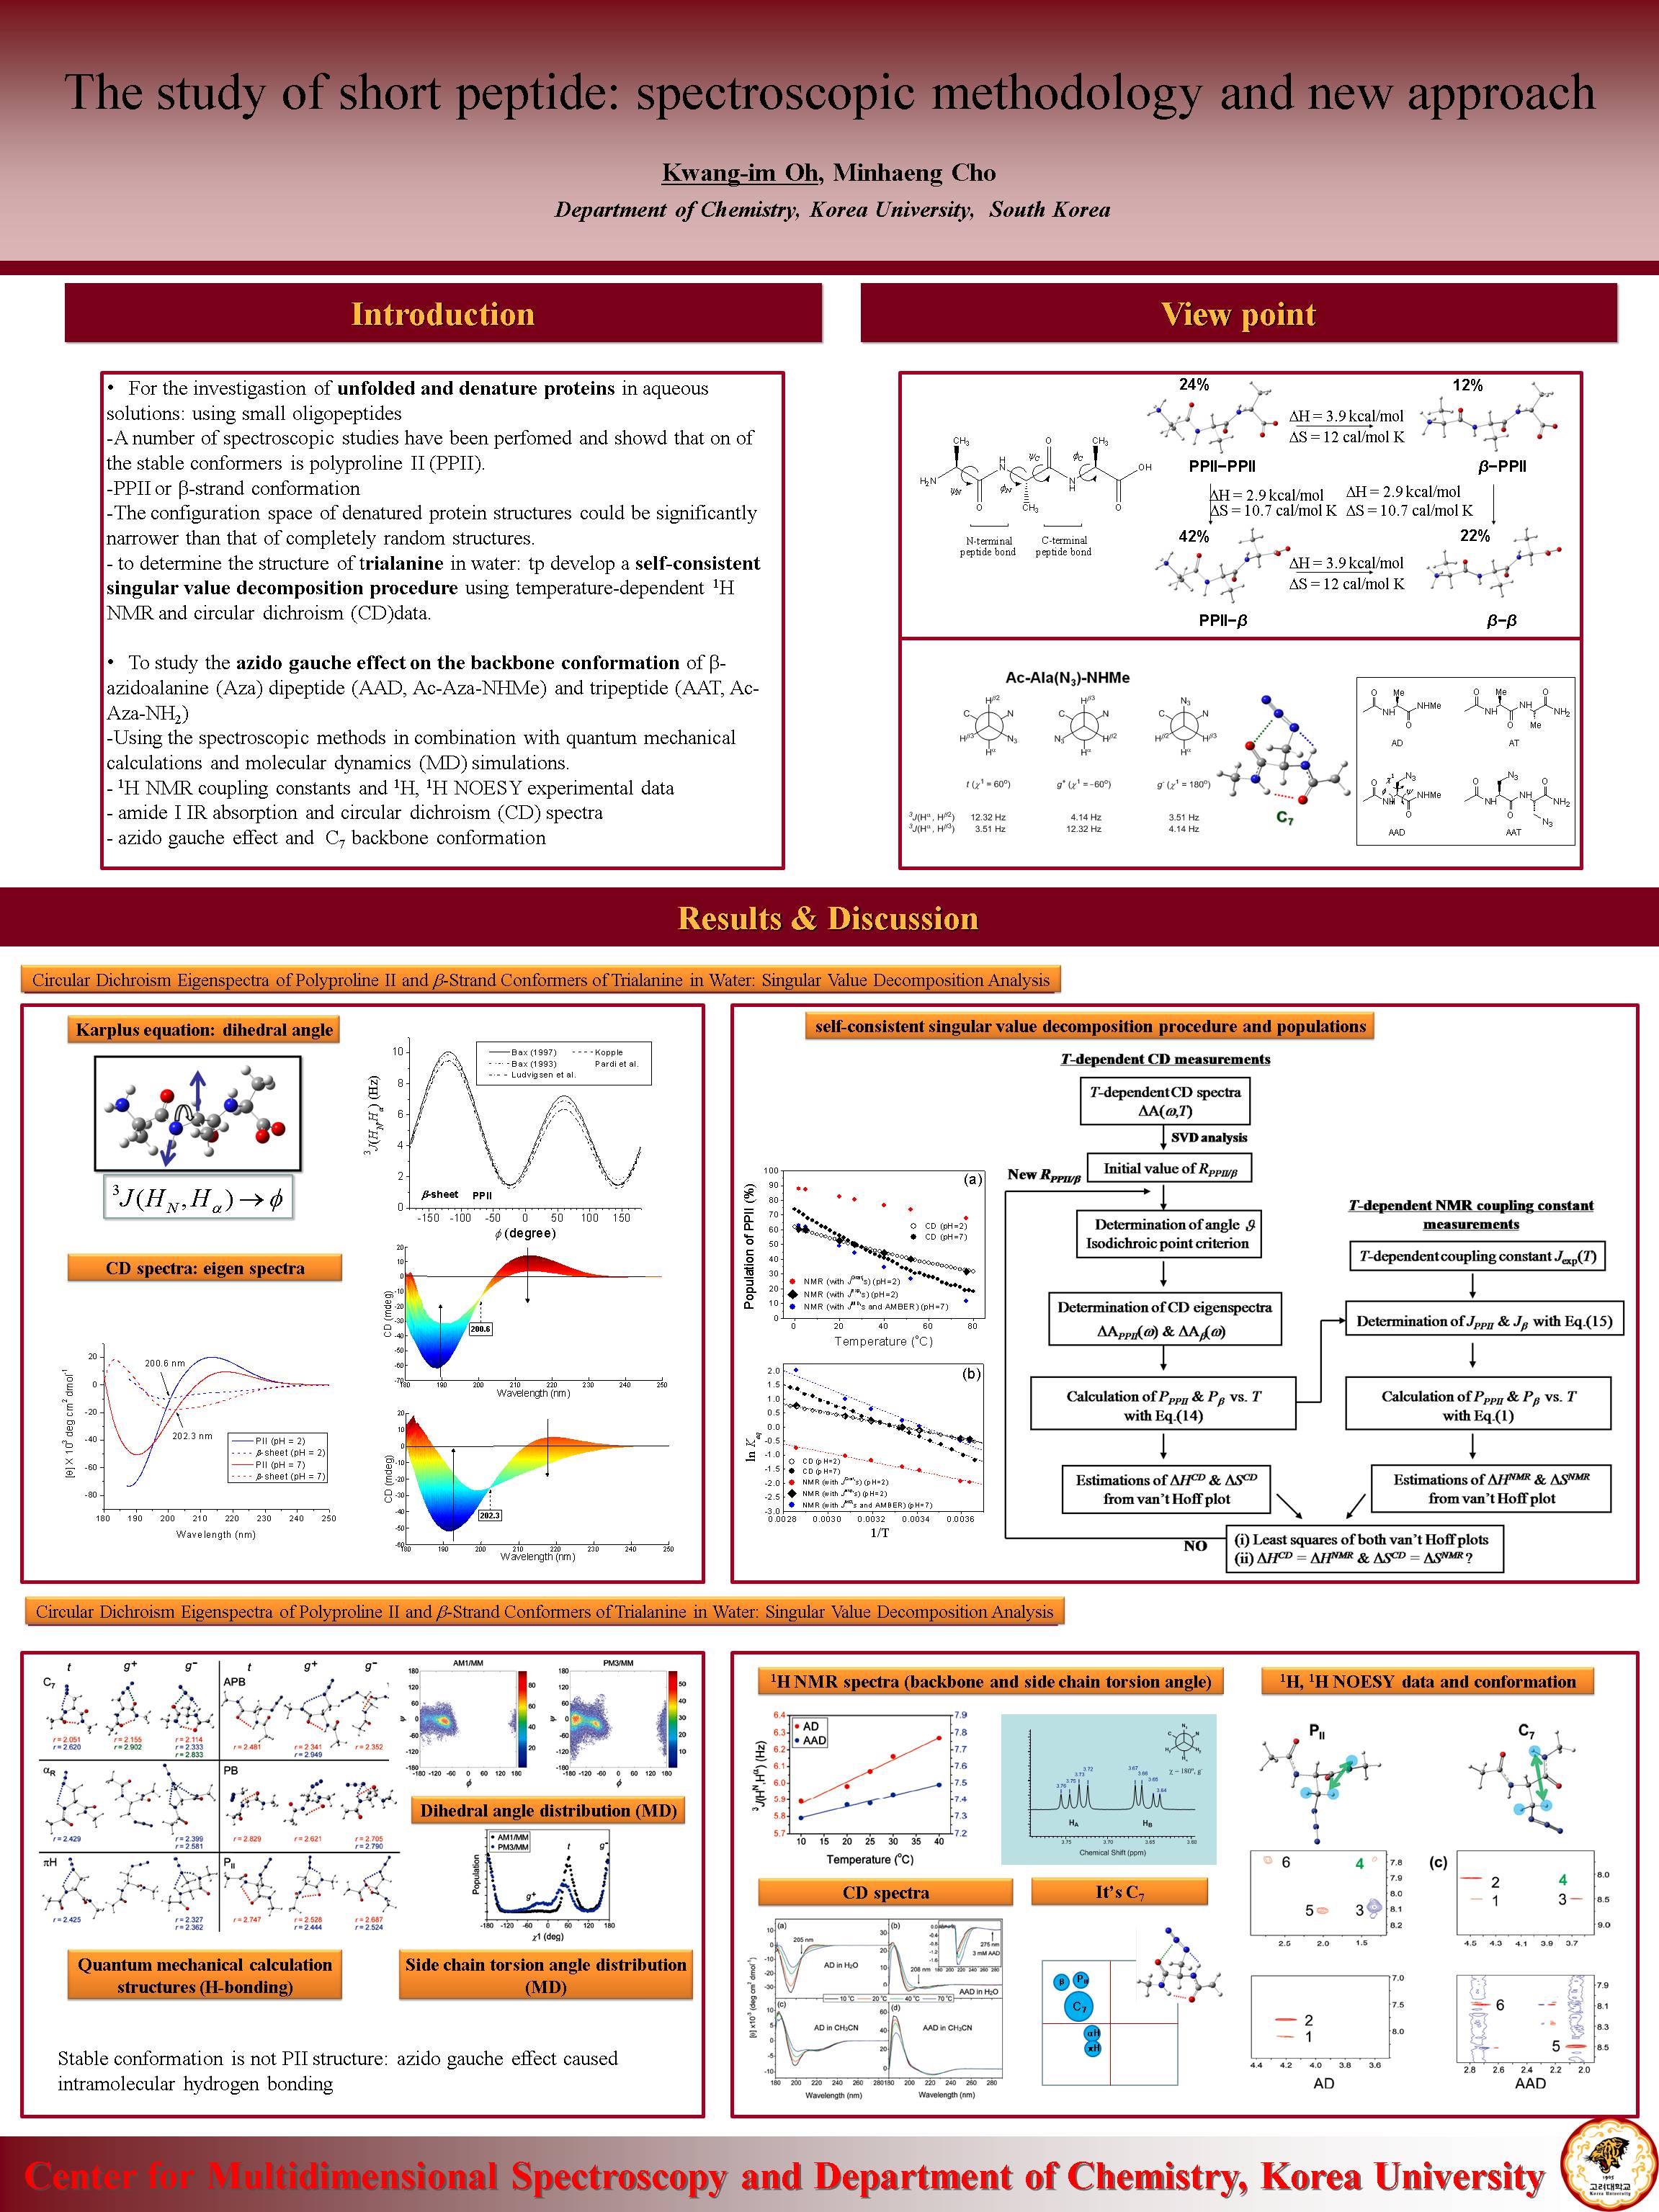 The Study of Short Peptide: Spectroscopic Methodology and New Approach 사진